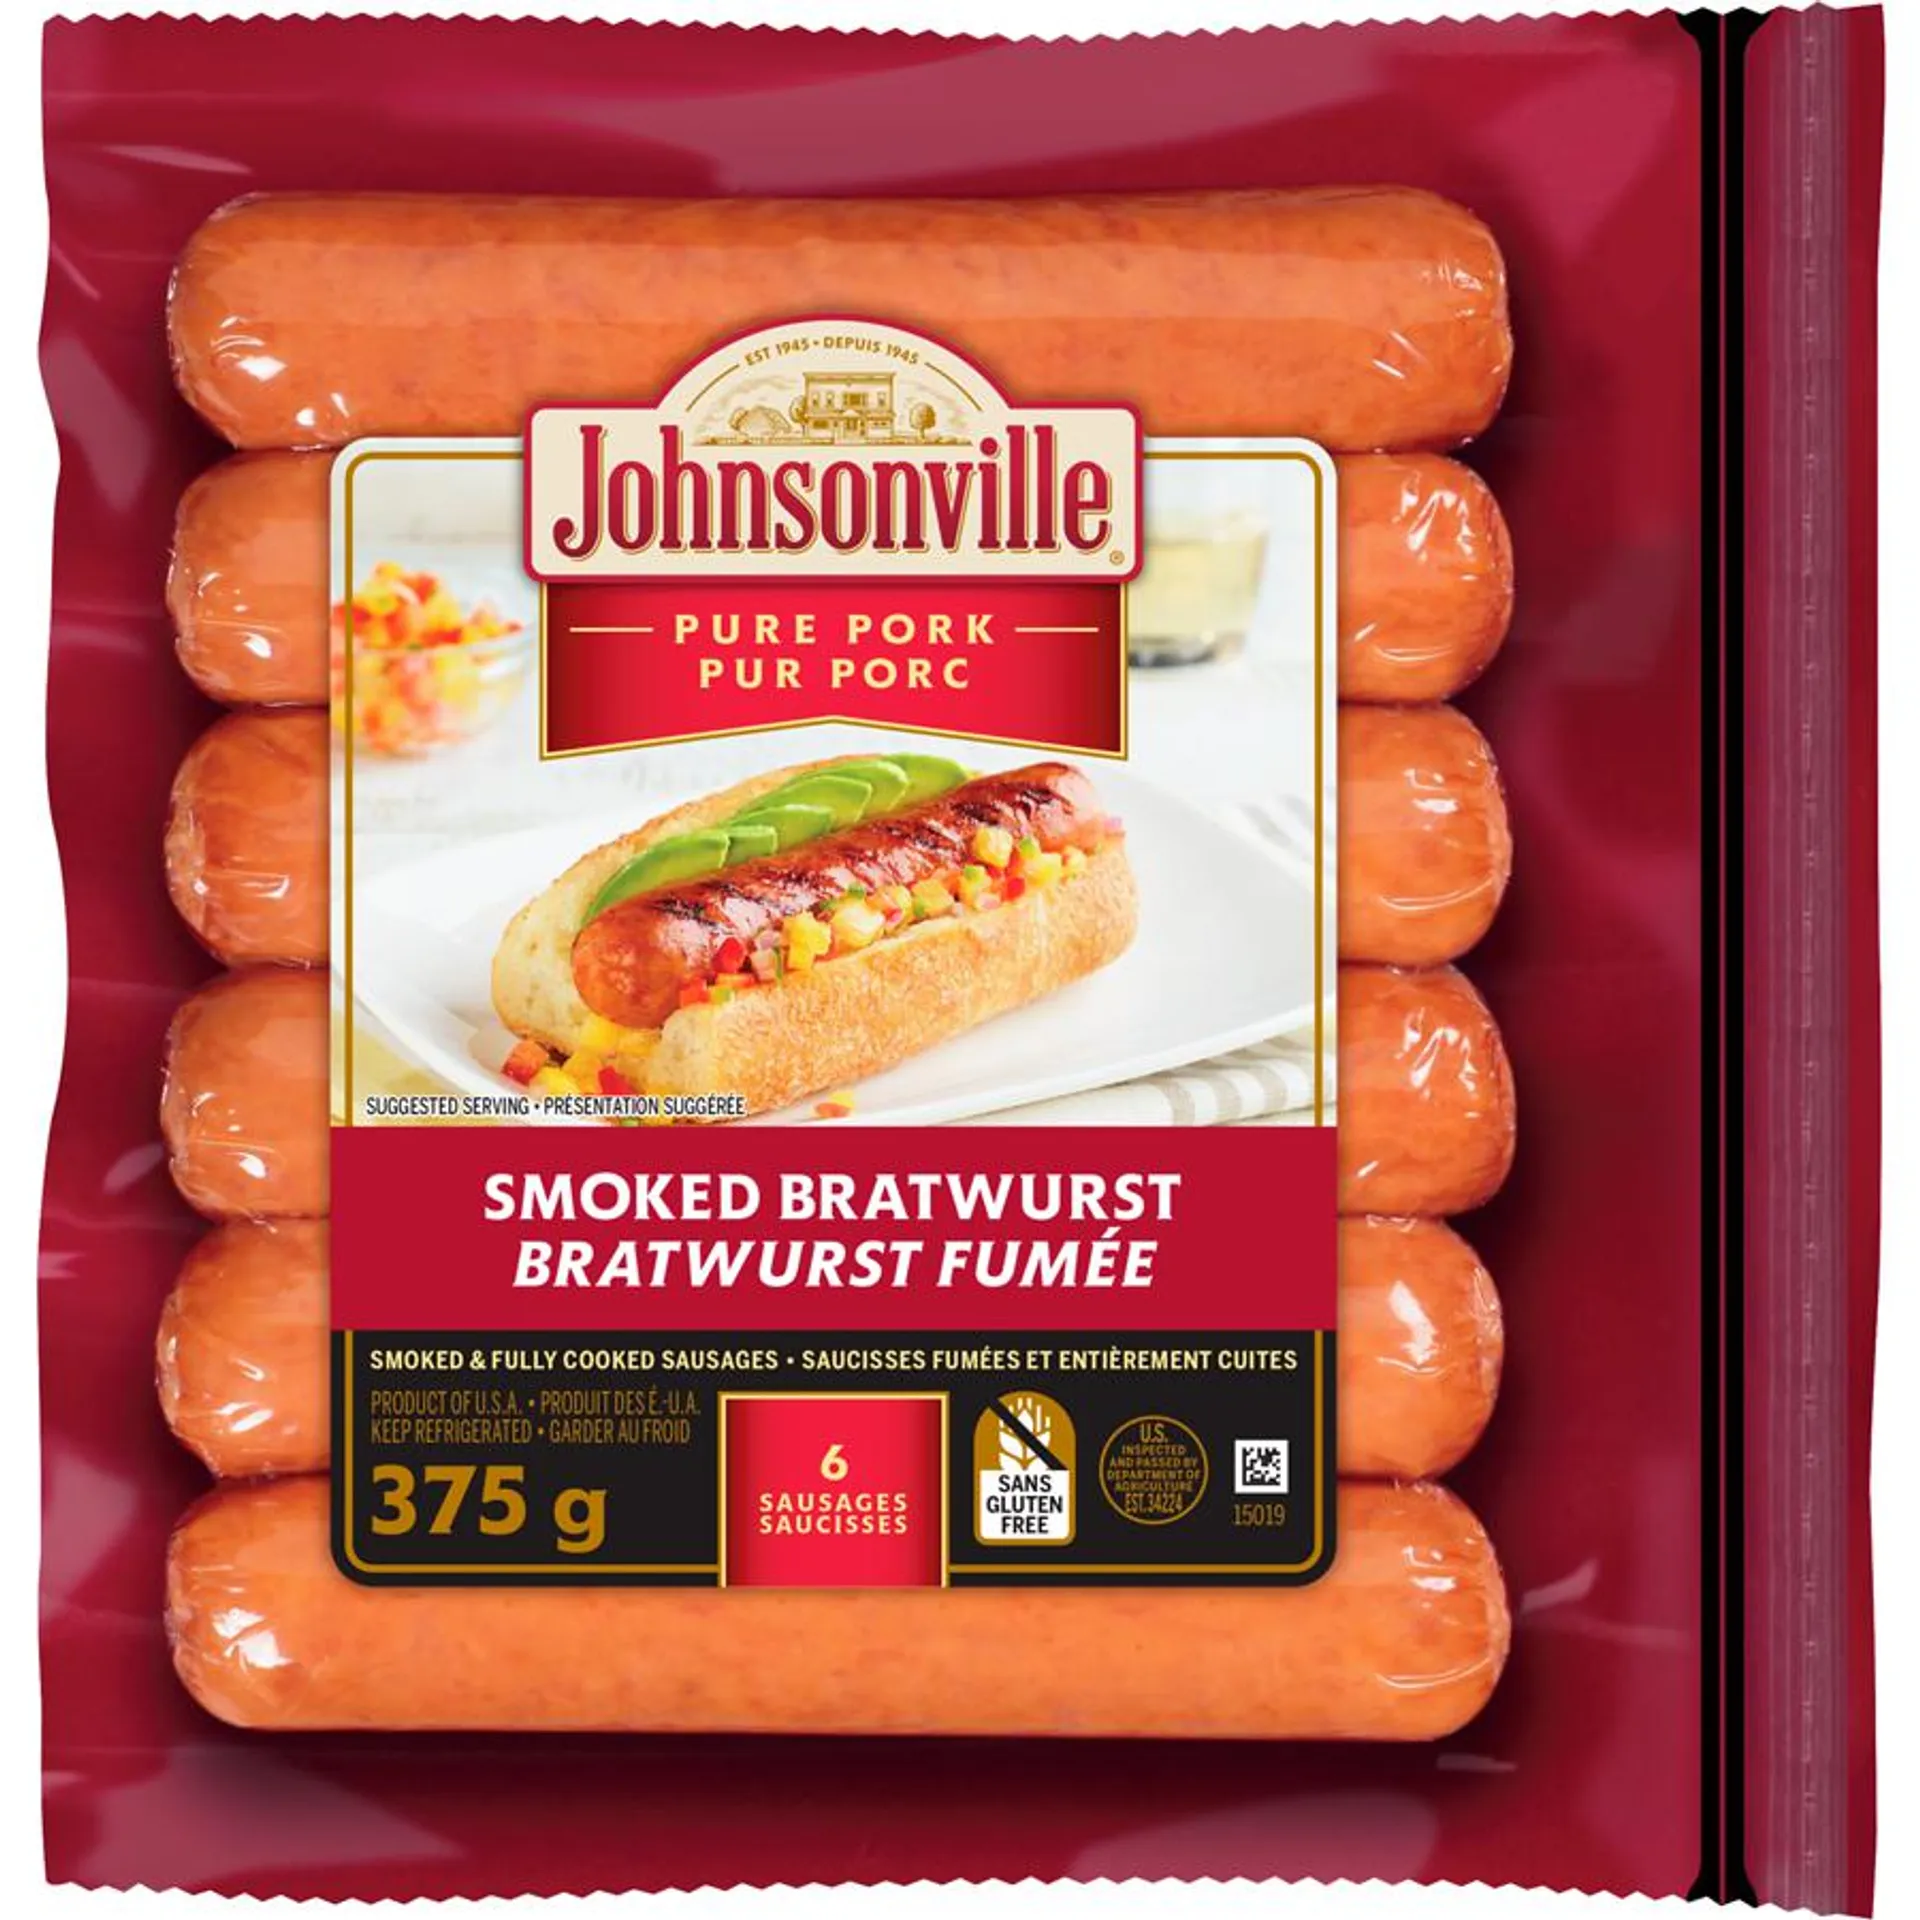 Smoked & Fully Cooked Sausages Pure Pork Smoked Bratwurst